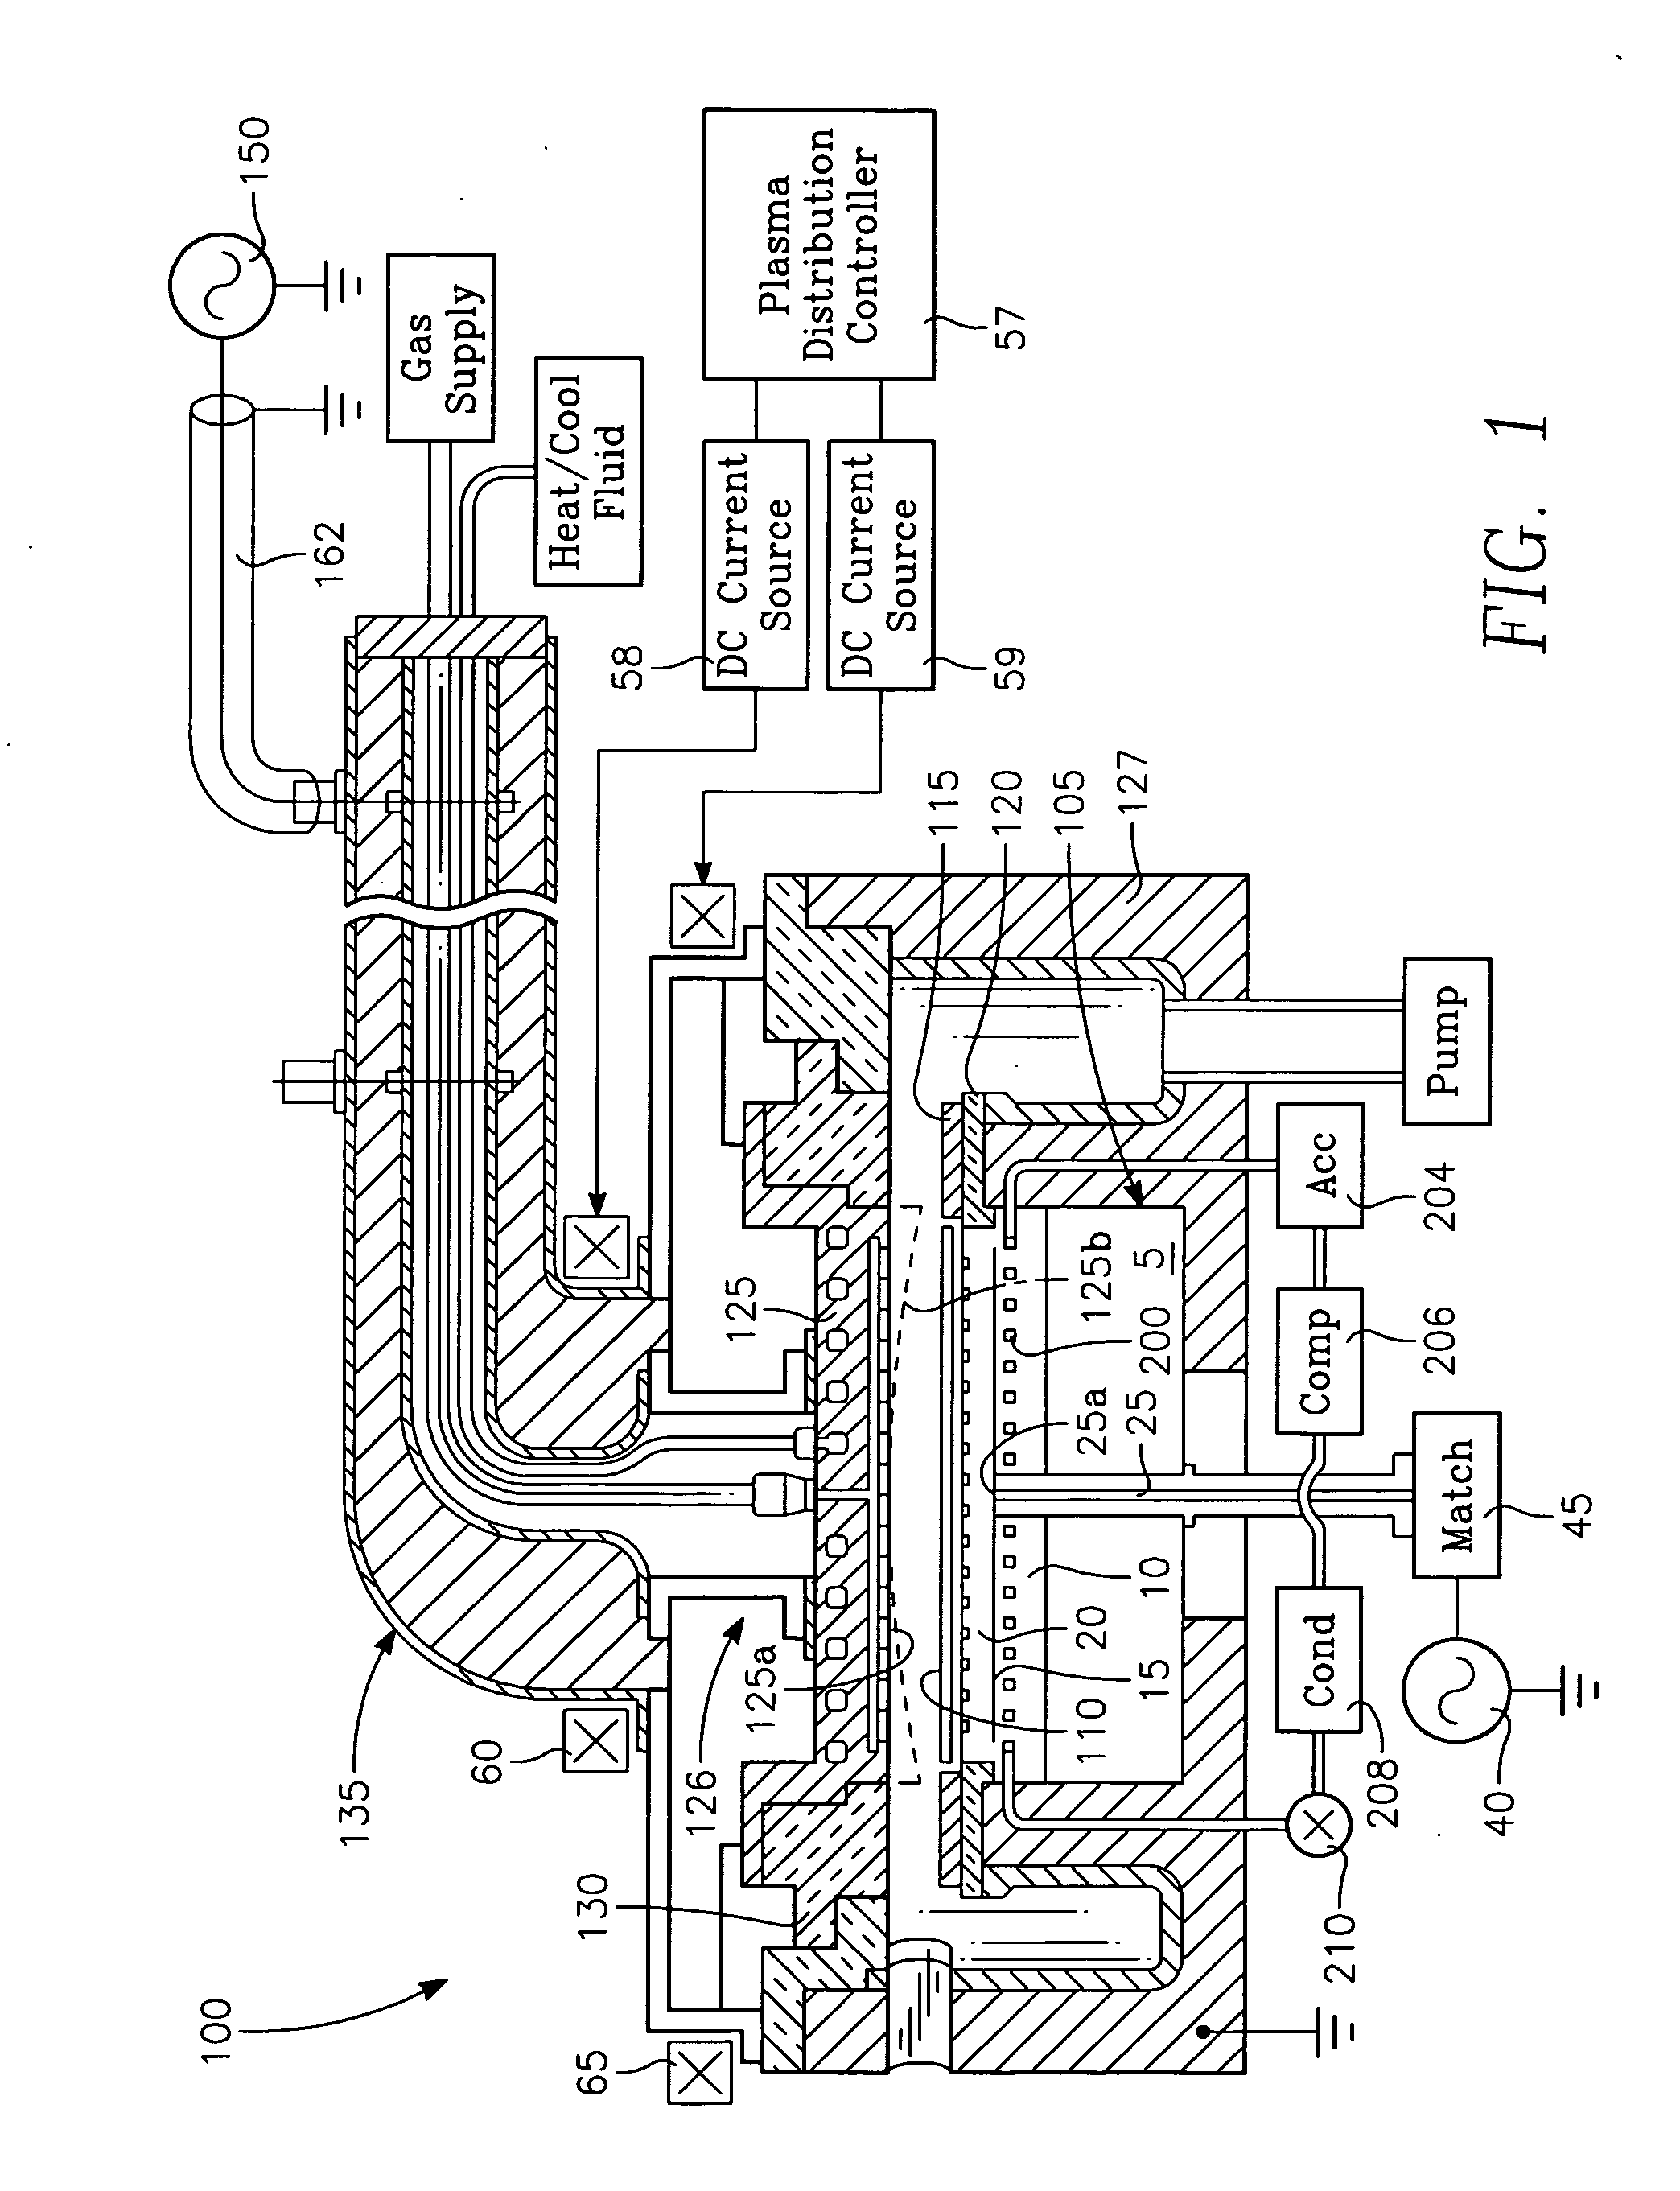 Method of operating a capacitively coupled plasma reactor with dual temperature control loops